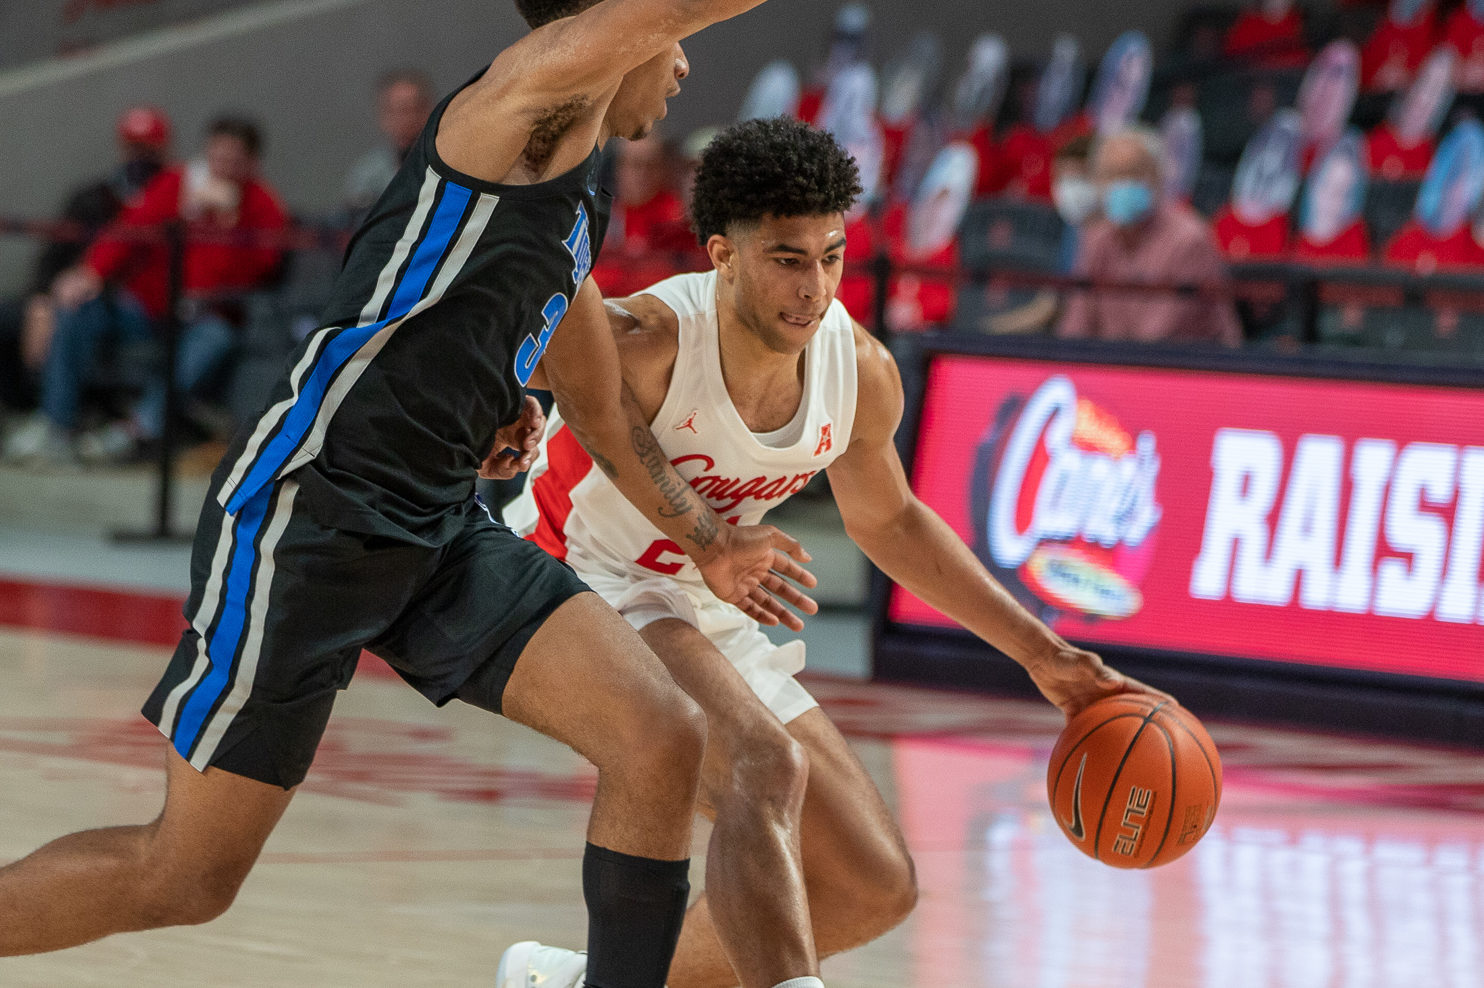 UH junior guard Quentin Grimes dribbles with his left hand as he is draped by a Memphis defender during a game on March 7 at Fertitta Center. | Andy Yanez/The Cougar